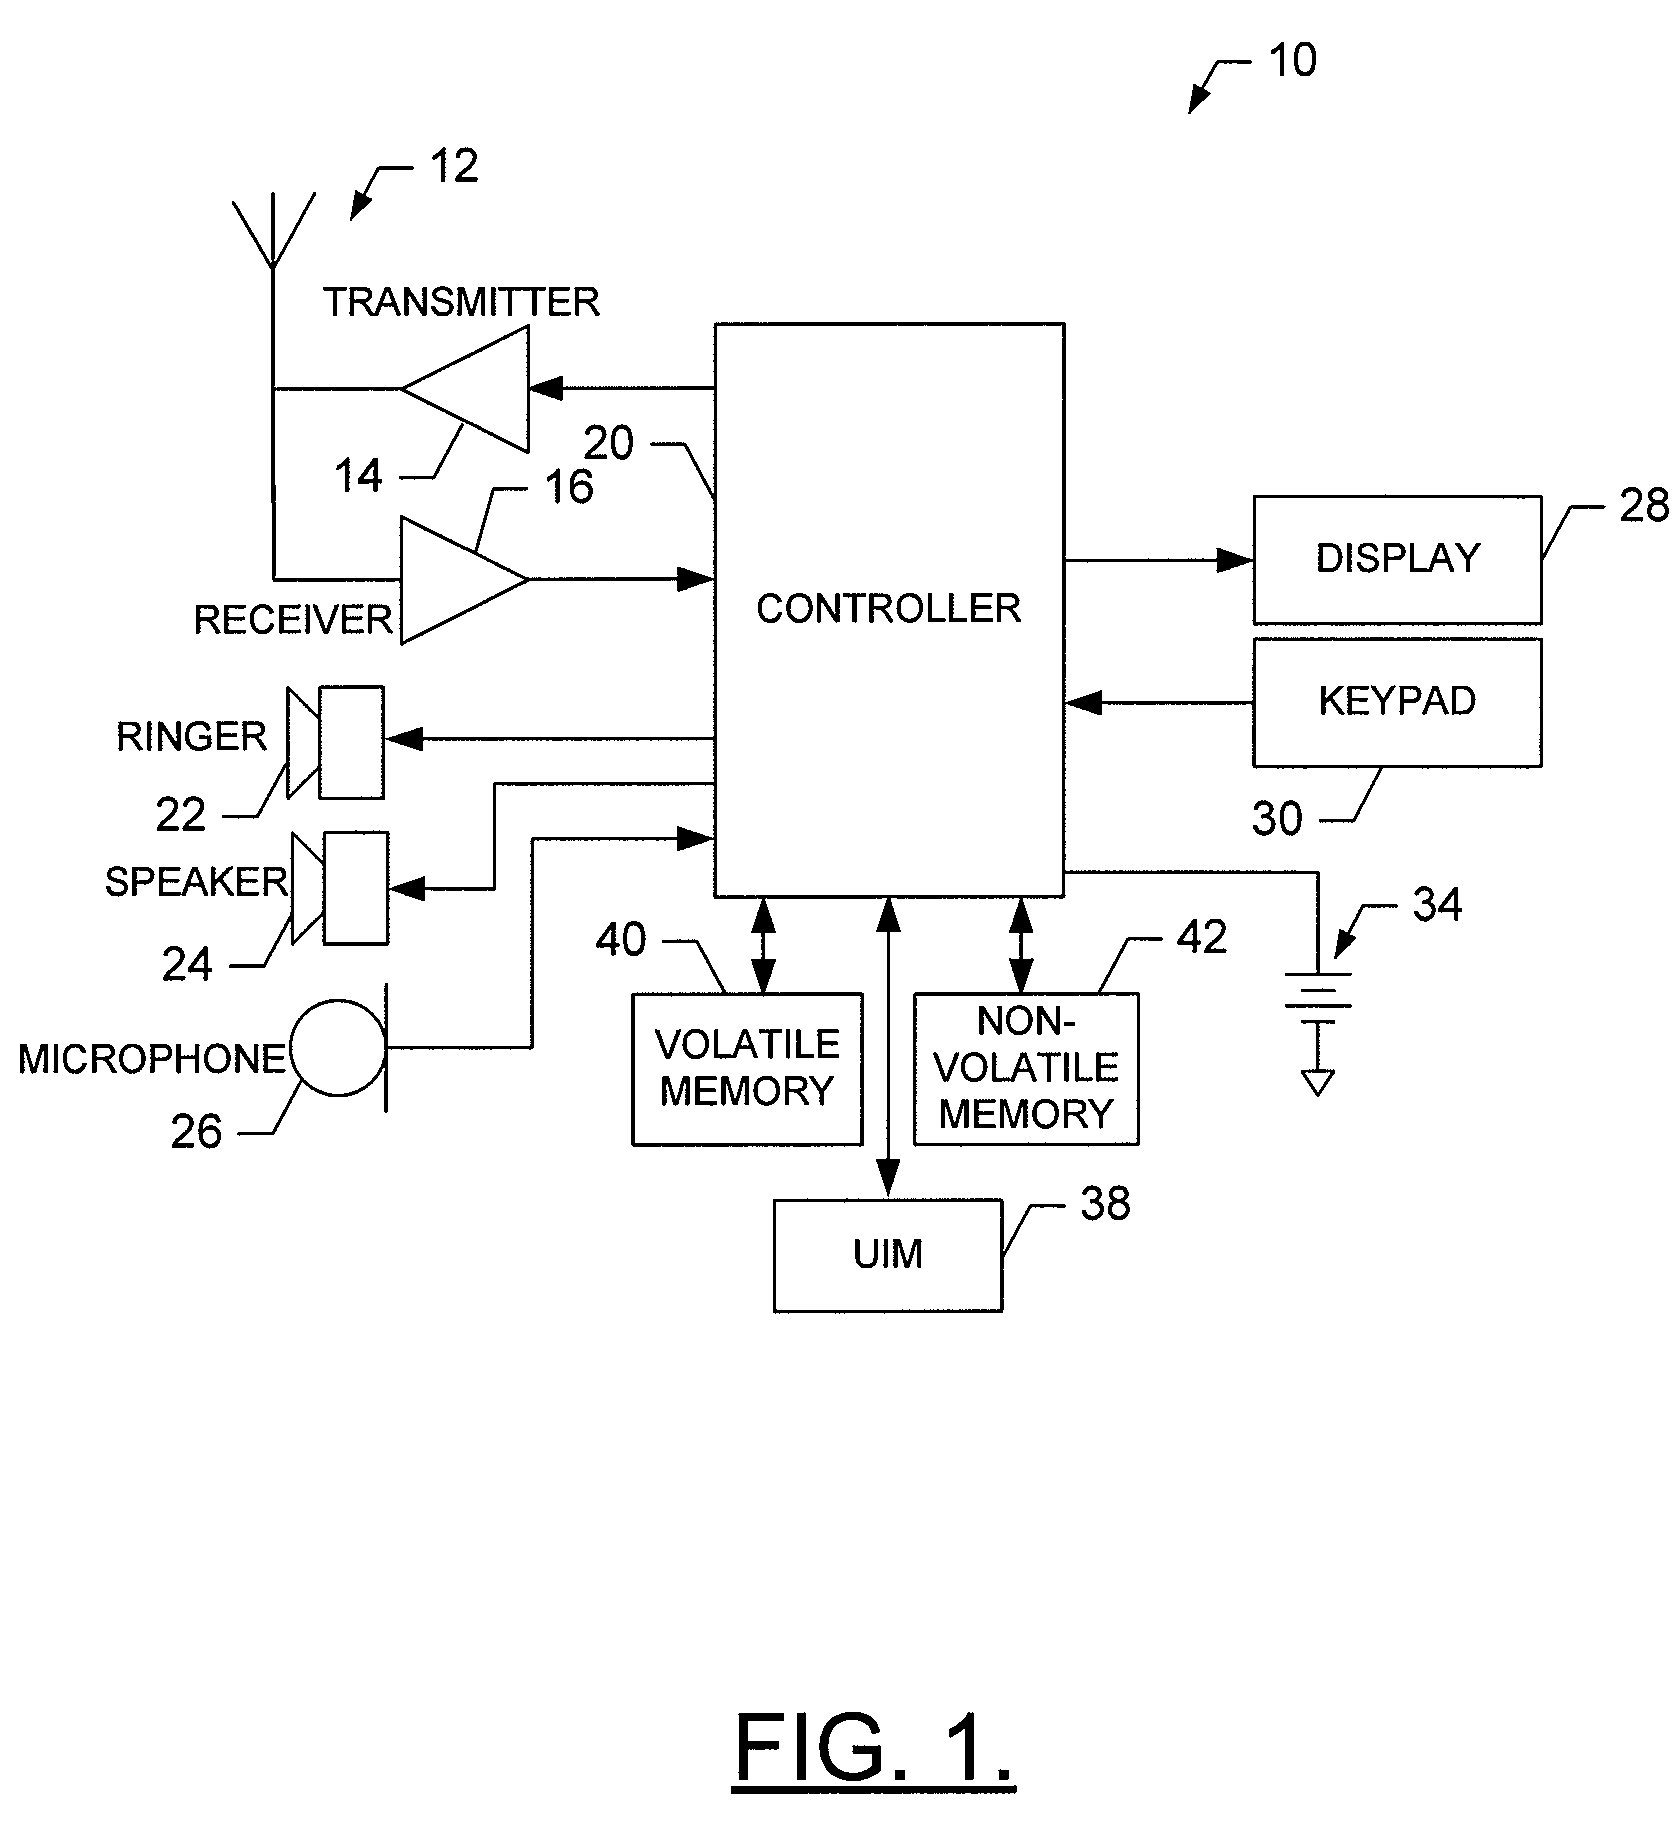 Method, Apparatus and Computer Program Product for Cross Triggering and Detection of Platform Dependent Resources, Features, Actions and Events